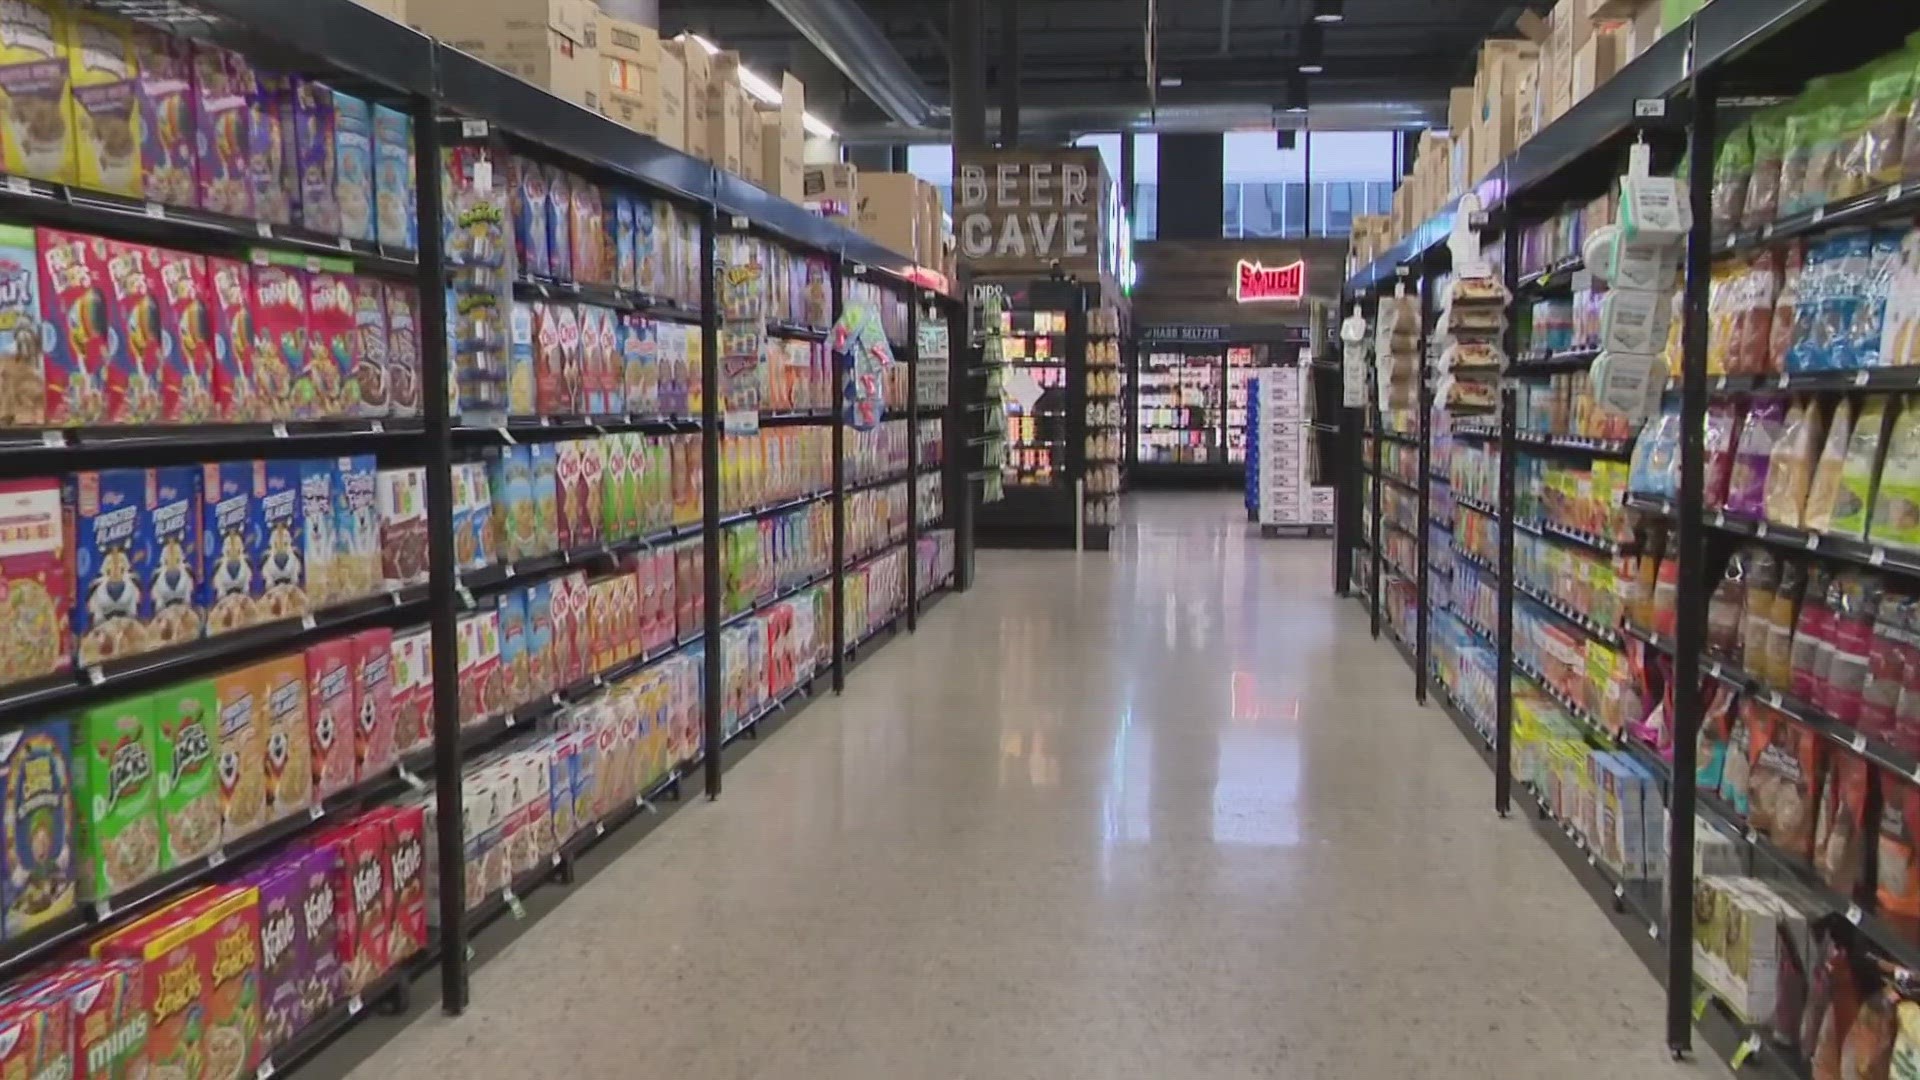 The new grocery store is a concept that director Alan Jordan says has been in the works since 2018.